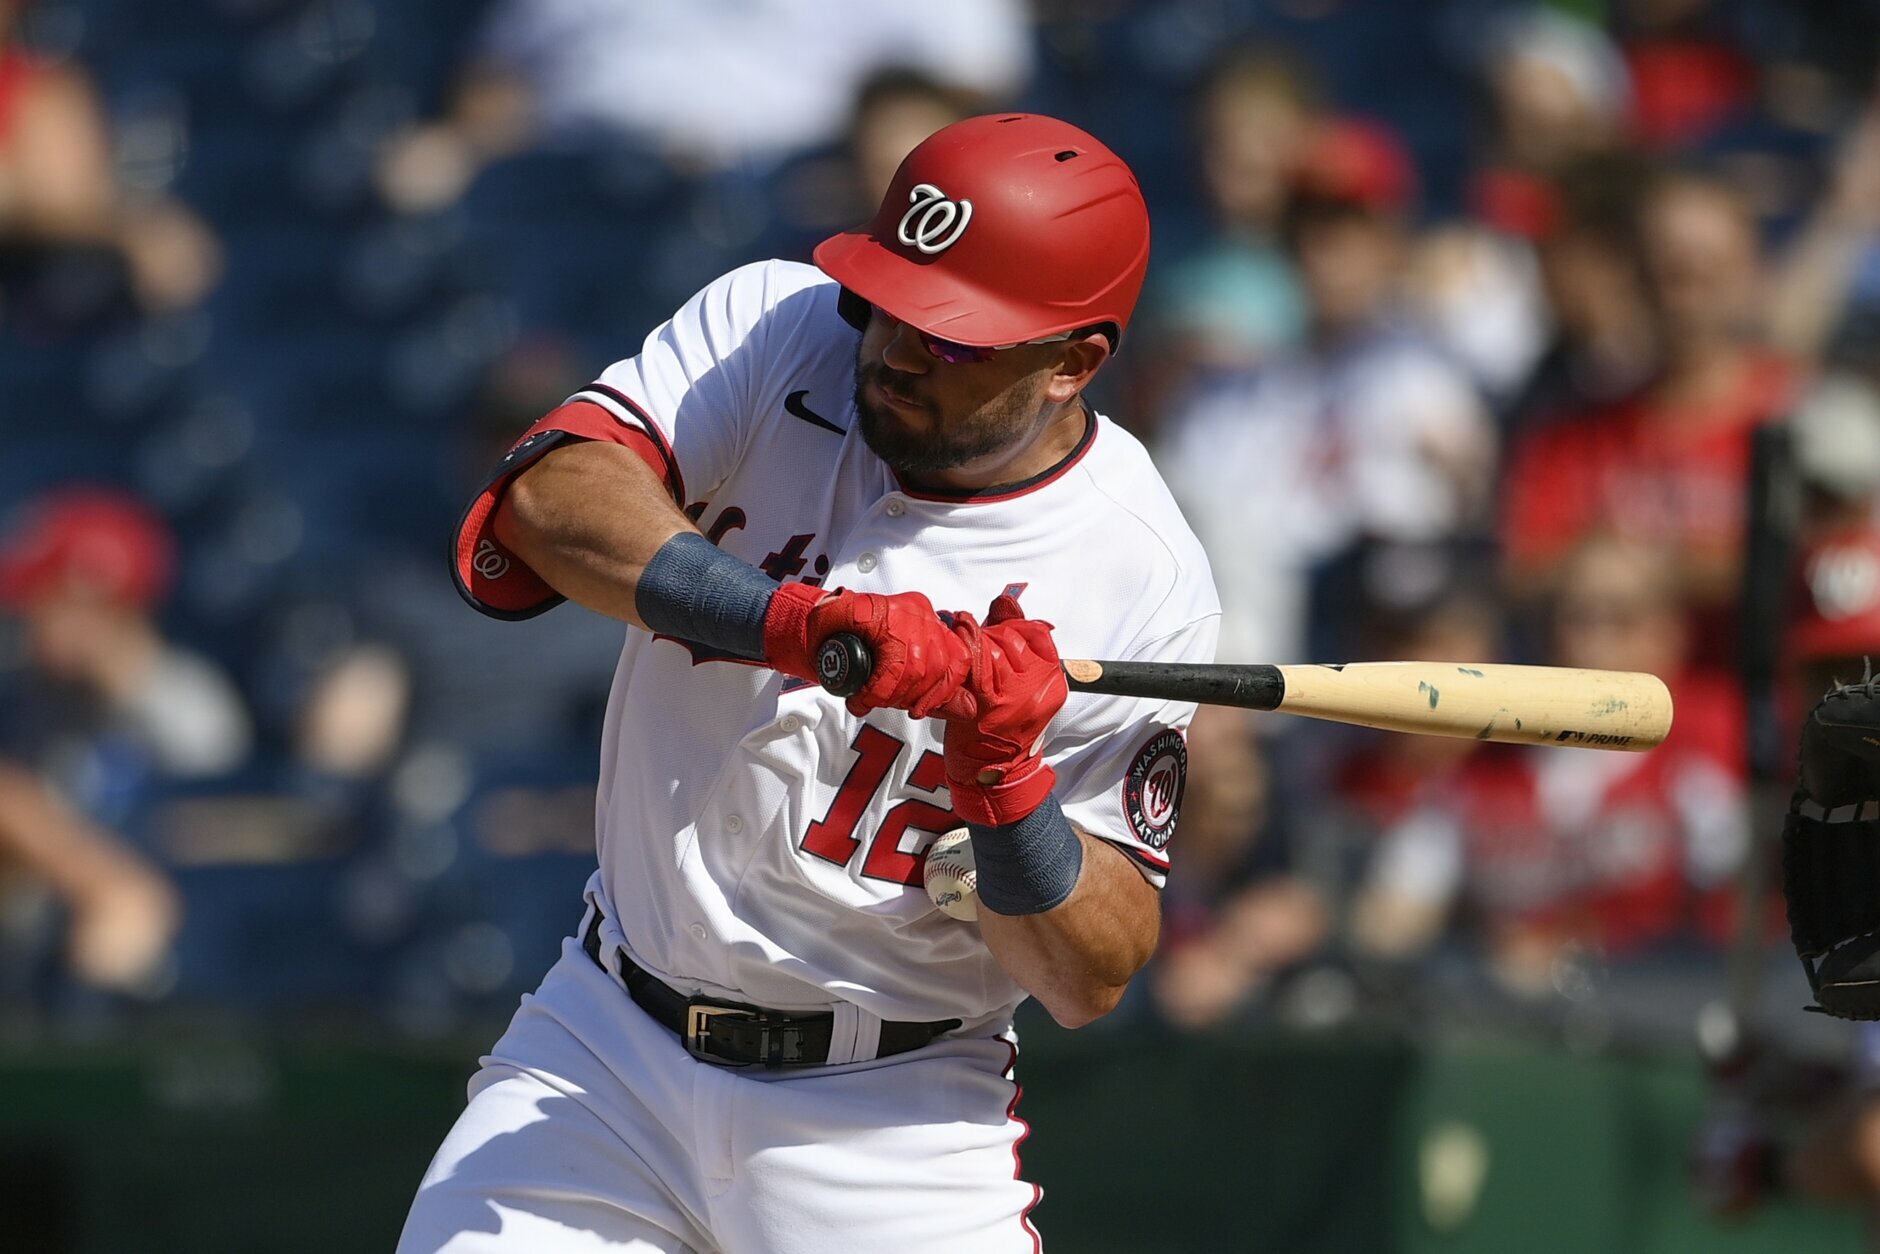 Birthday boy Turner ties mark with 3rd cycle, Nats top Rays